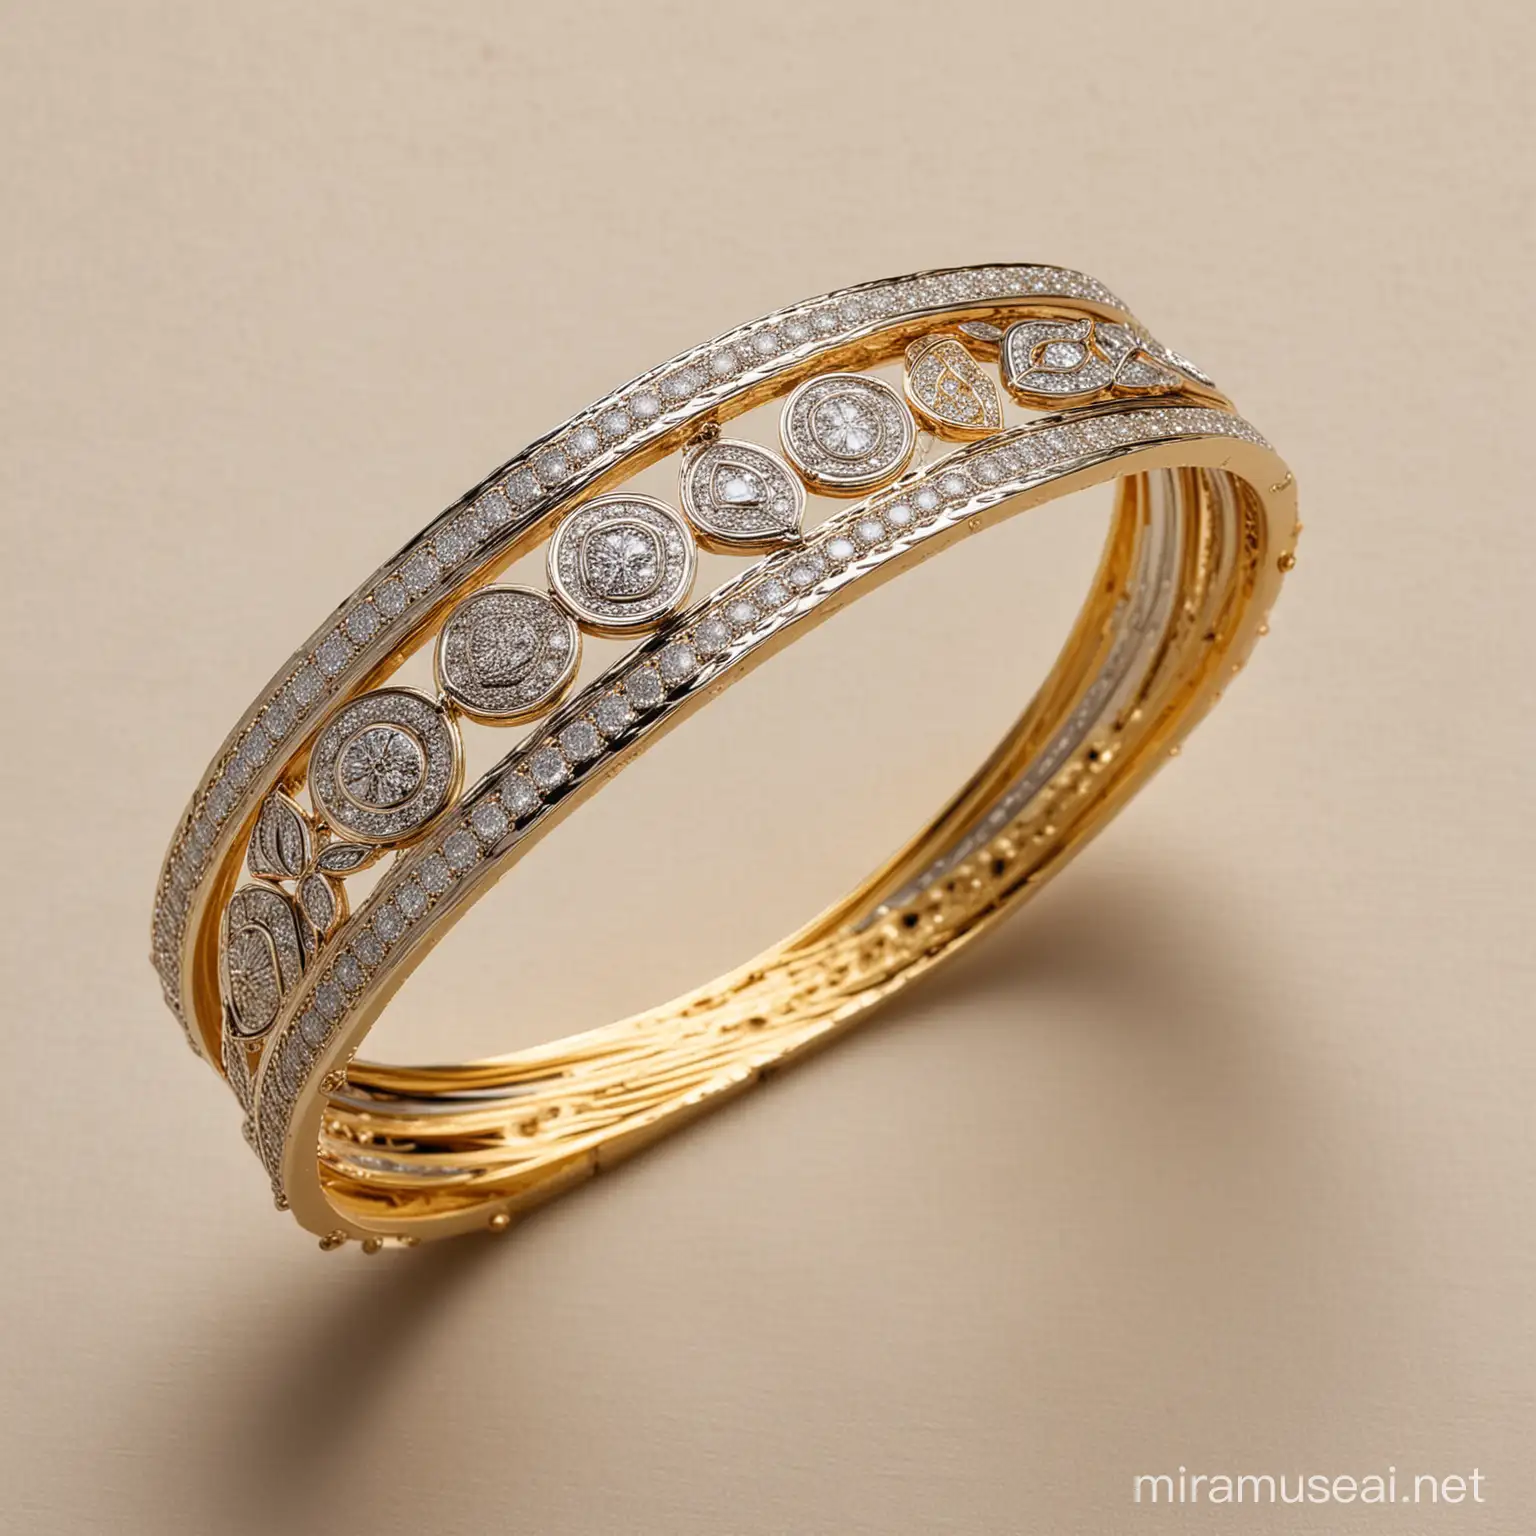 A premium design of a bangle (that indian women use to wear on their wrists)made up of gold , platanium and diamondwith minimalist design